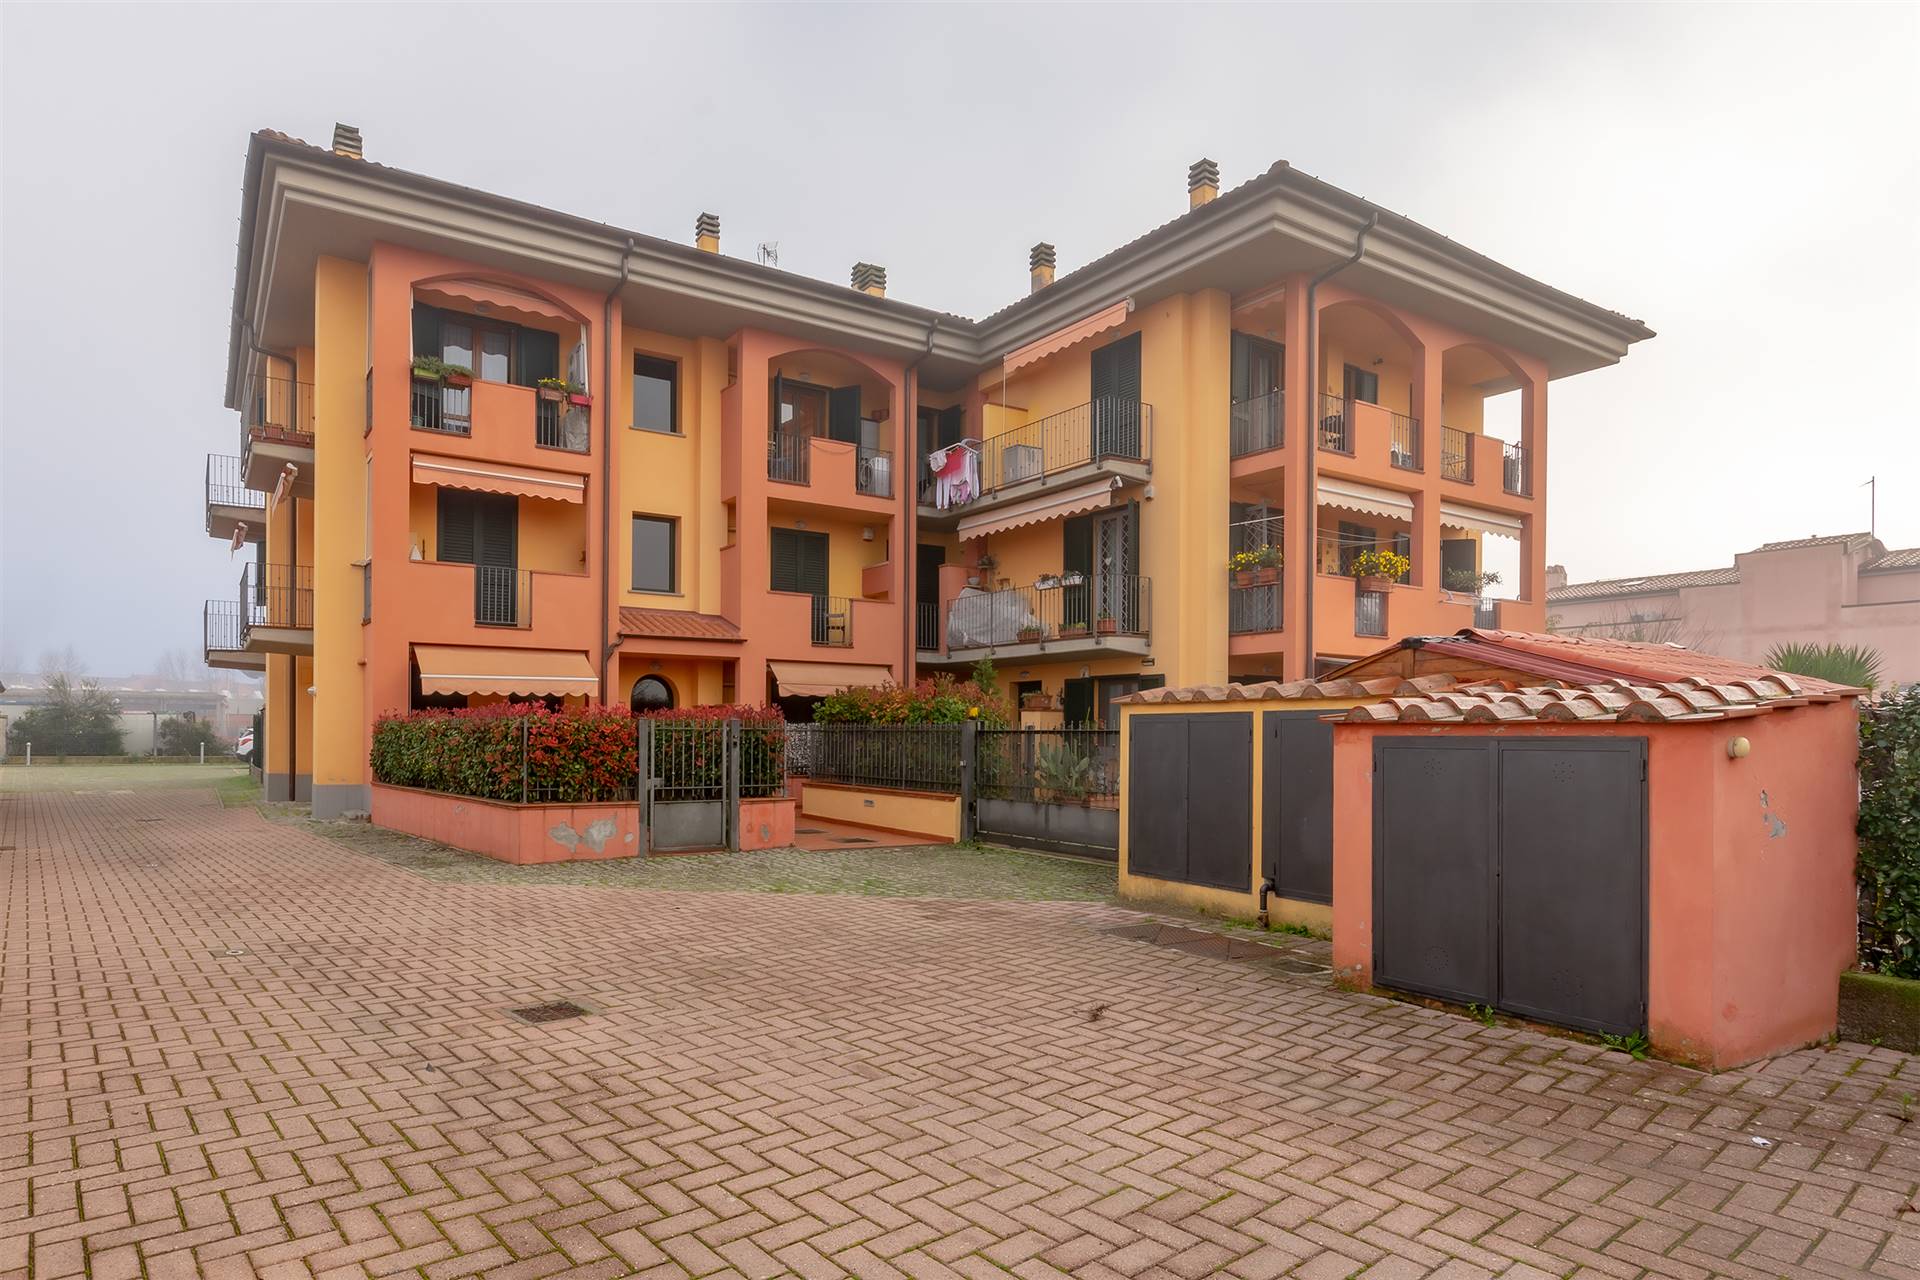 LA VILLA, CAMPI BISENZIO, Apartment for sale of 59 Sq. mt., Excellent Condition, Heating Individual heating system, Energetic class: G, placed at 1° 